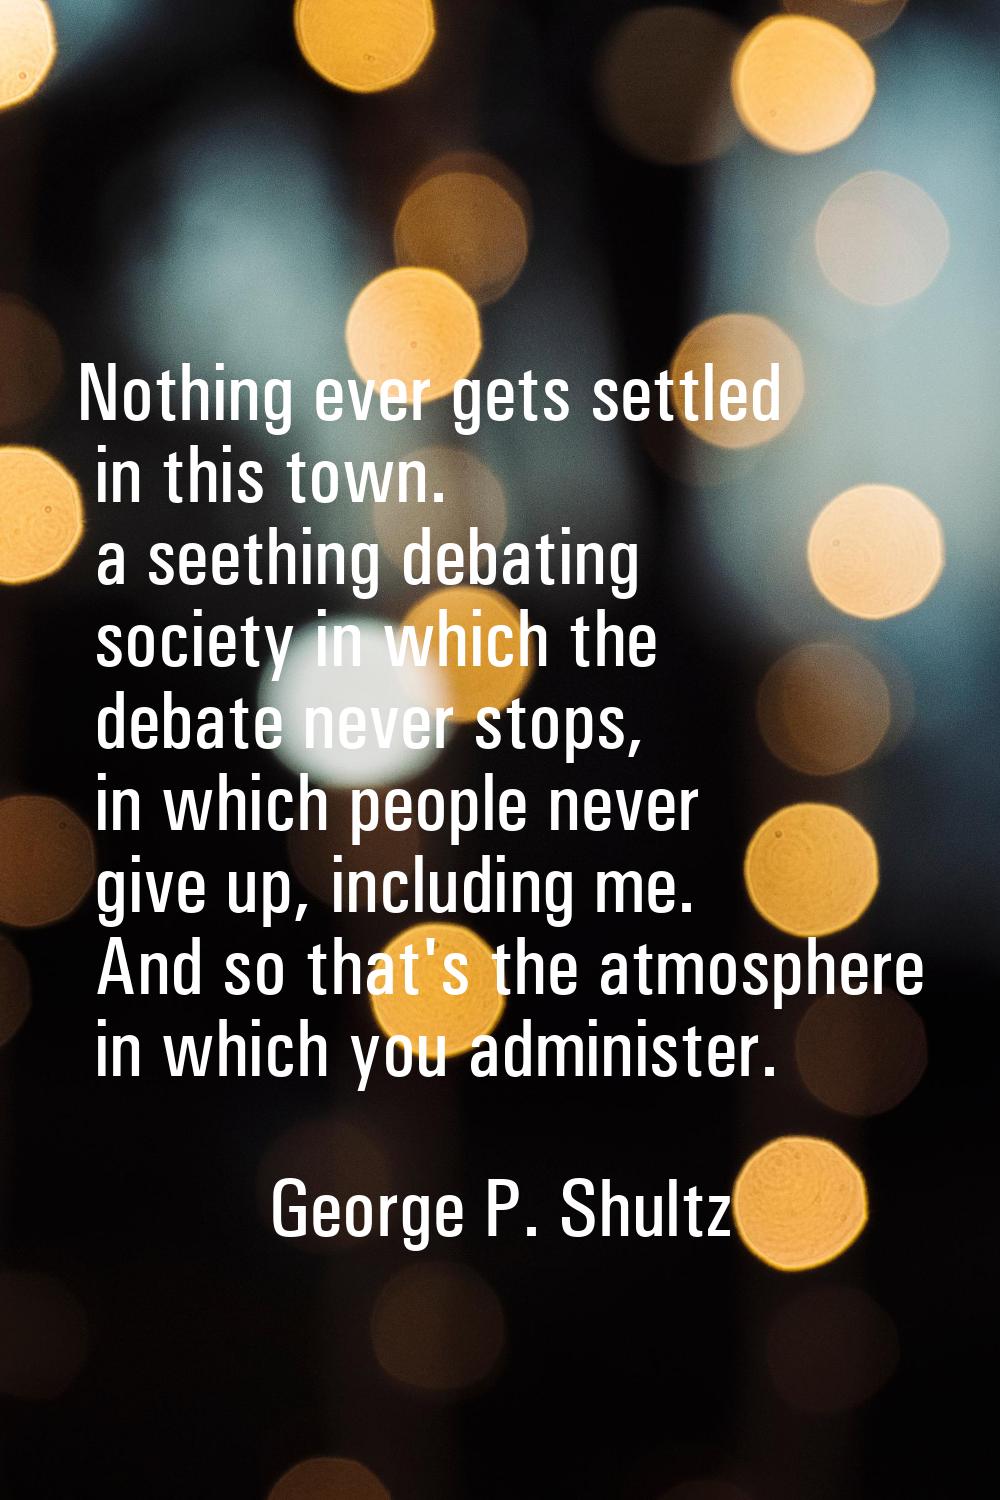 Nothing ever gets settled in this town. a seething debating society in which the debate never stops